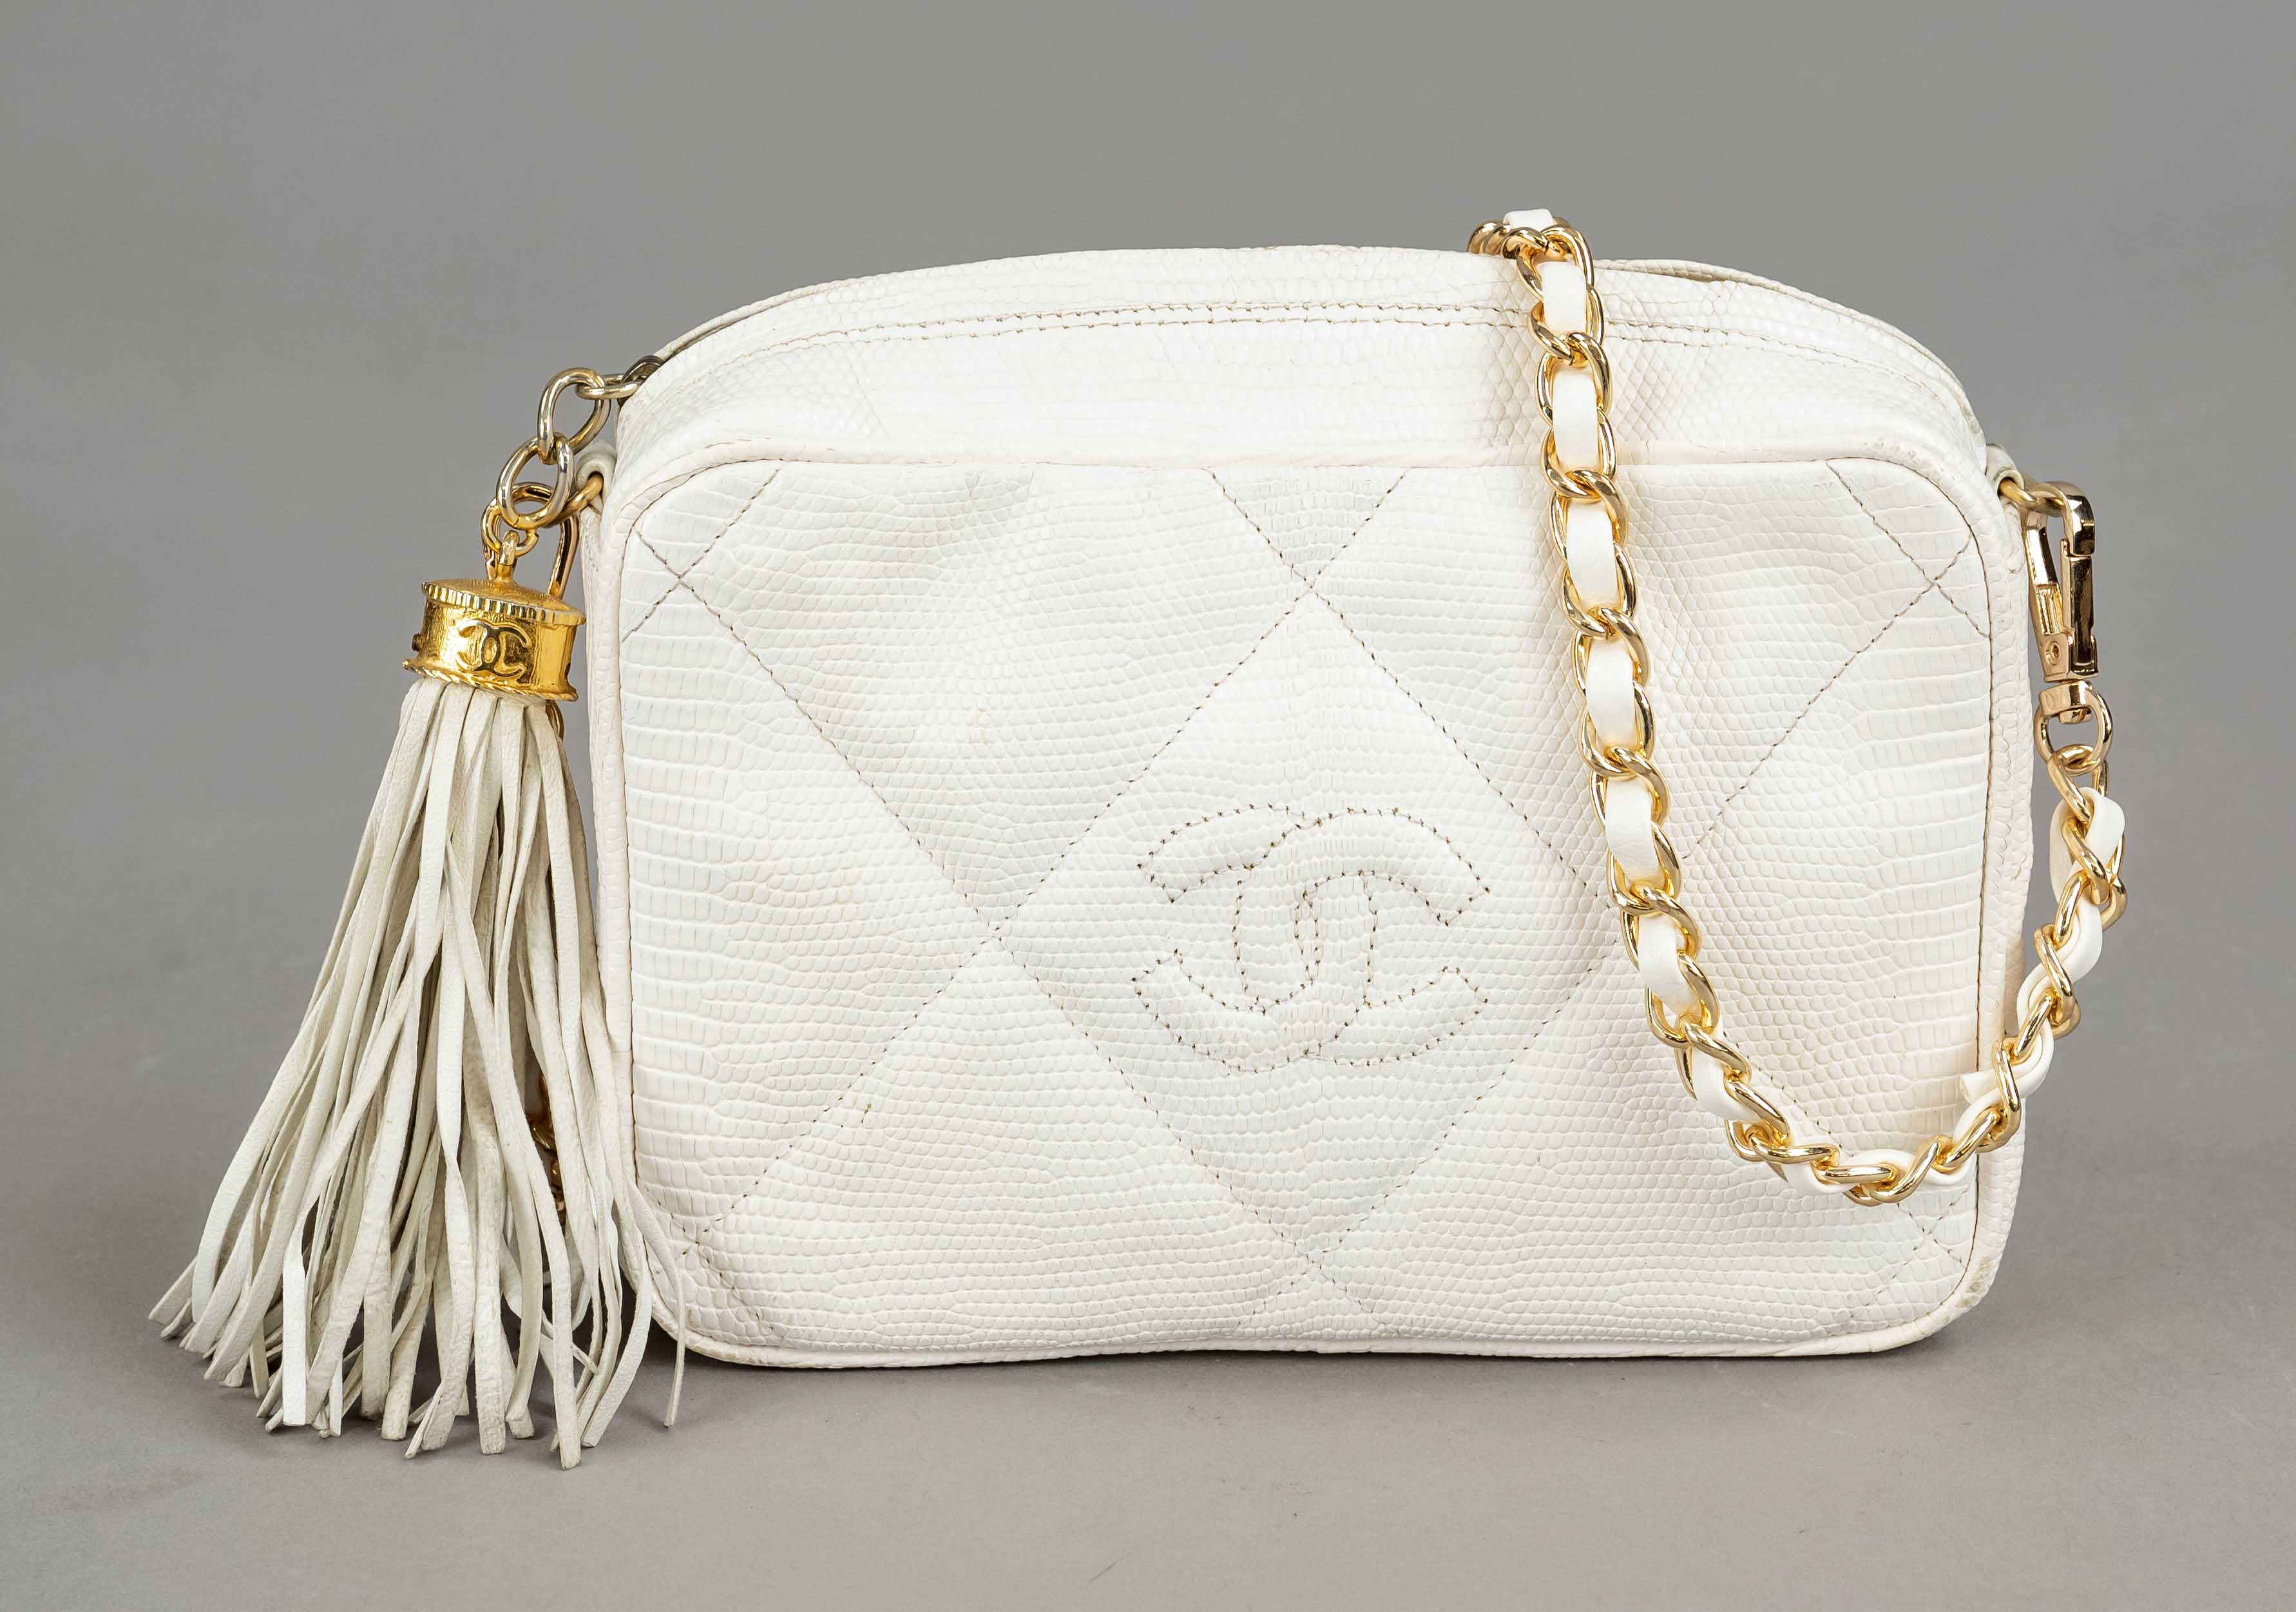 Chanel, White Vintage Quilted Tassel Camera Crossbody Bag, creamy white quilted caviar leather in